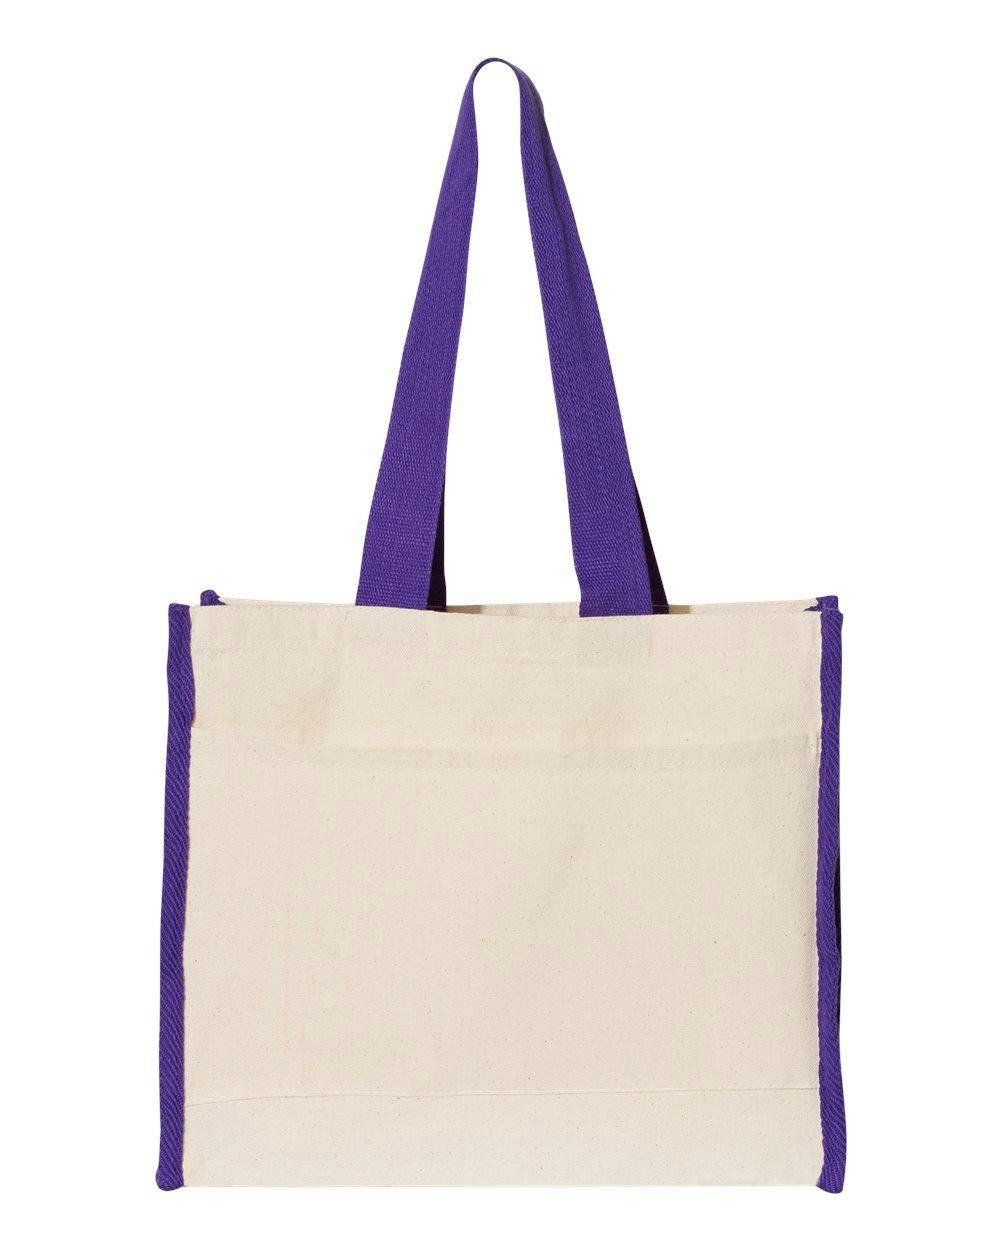 Image for 14L Tote with Contrast-Color Handles - Q1100